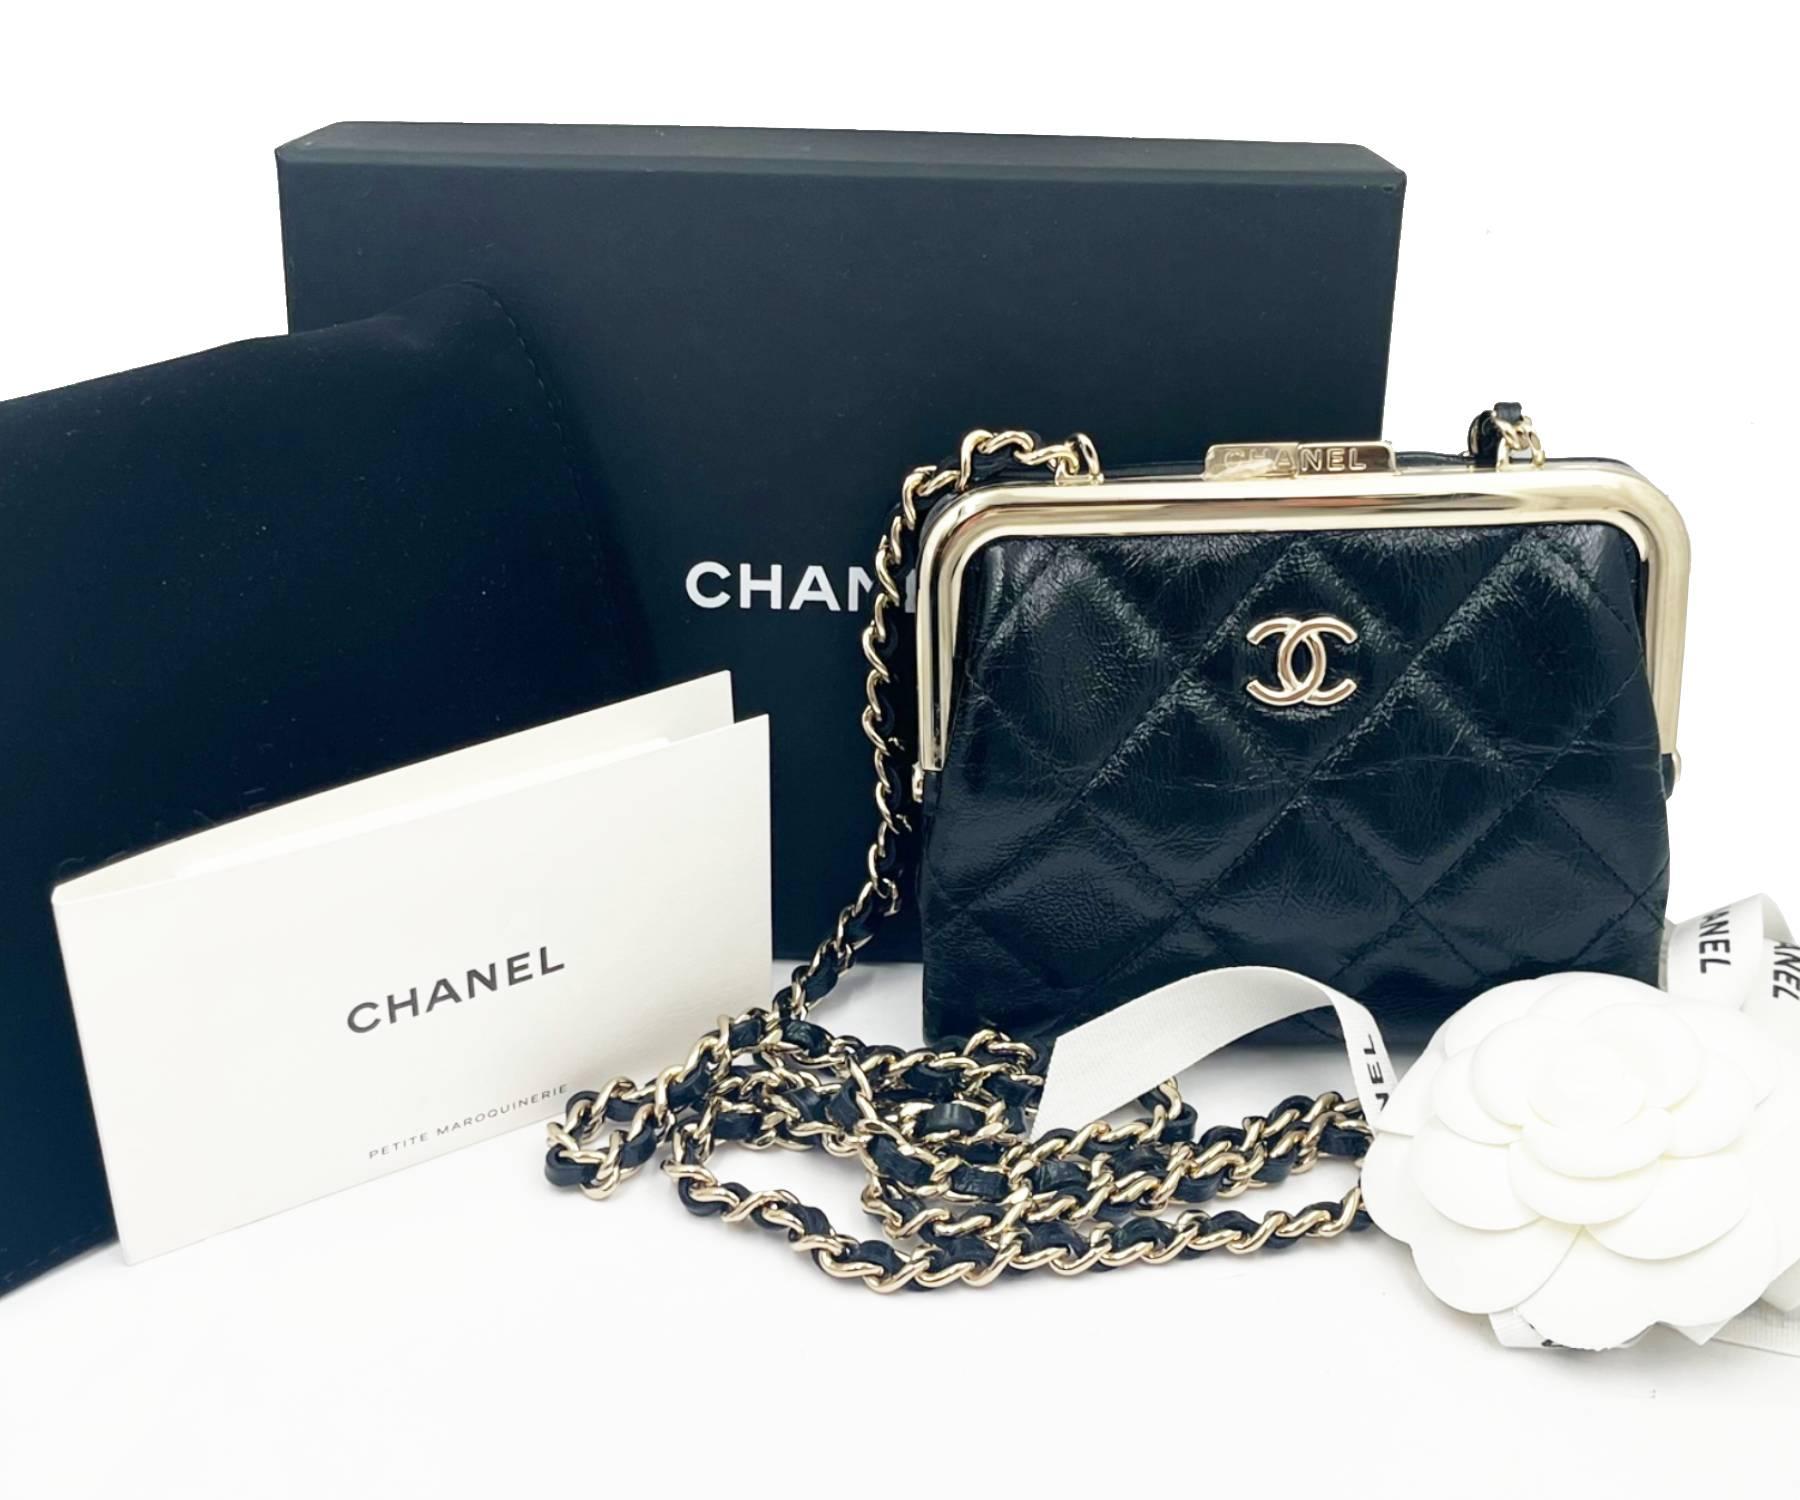 Chanel Brand New Black Crinkled Leather Coin Purse Crossbody Bag

*Marked G2XXXXXX
*Made in Italy
*Comes with the original box, pouch, ribbon, flower and booklet
*Brand New

-It is approximately 4.75″ x 4″ x 1.25″, after opening, it is approximately